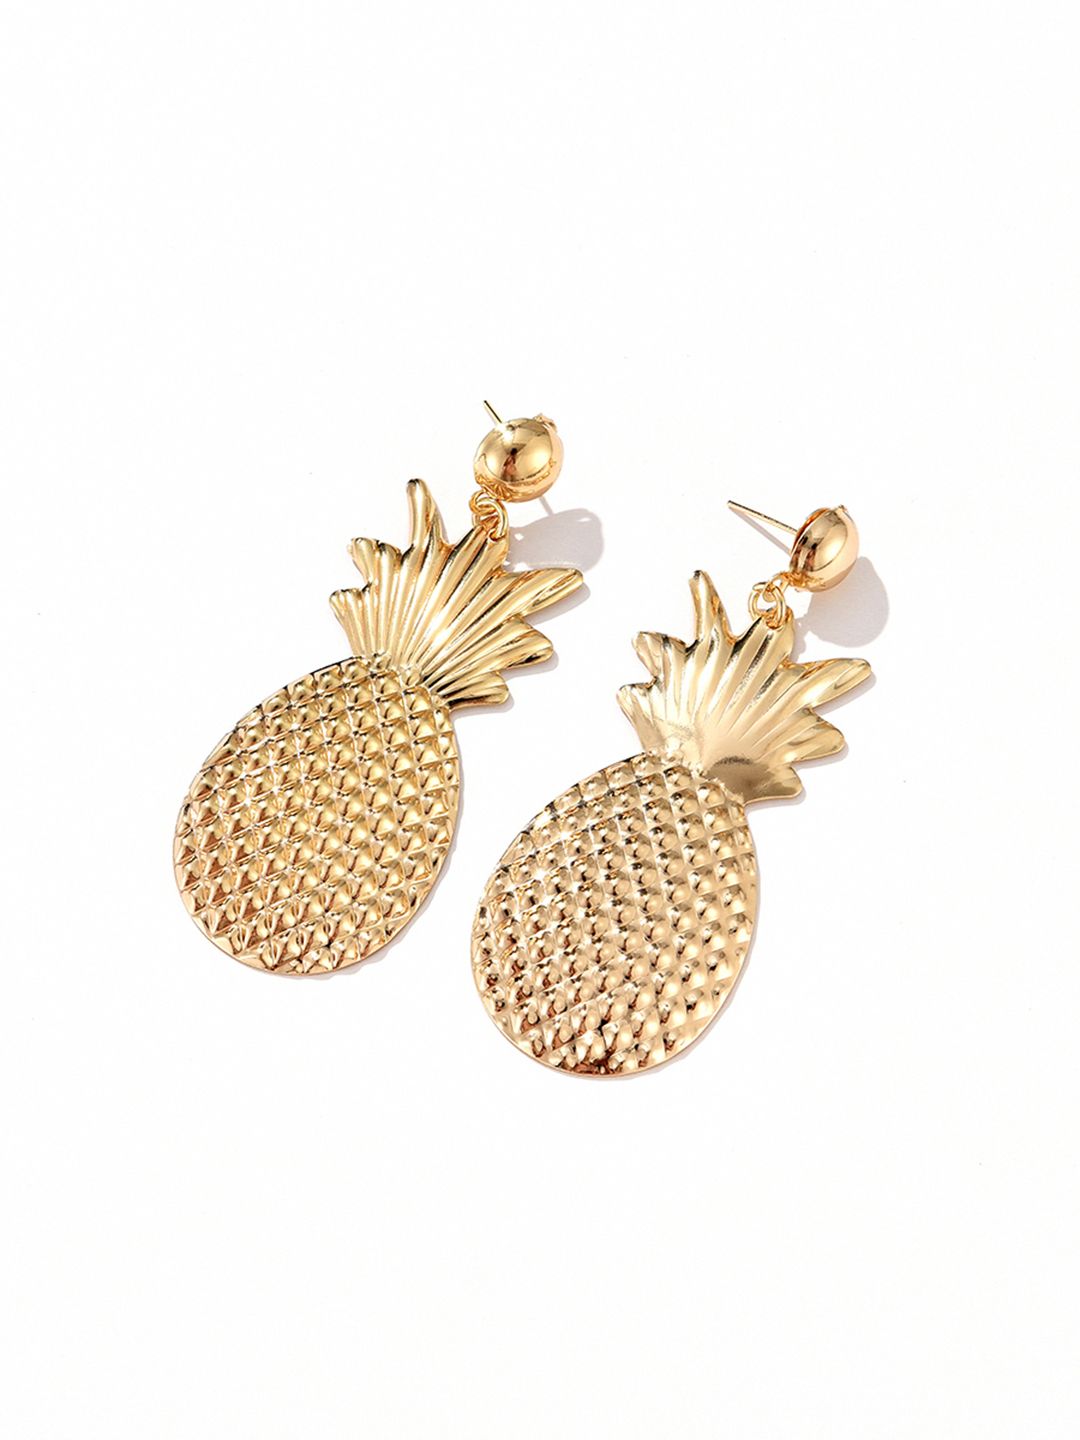 URBANIC Gold-Toned Pineapple Shaped Textured Drop Earrings Price in India